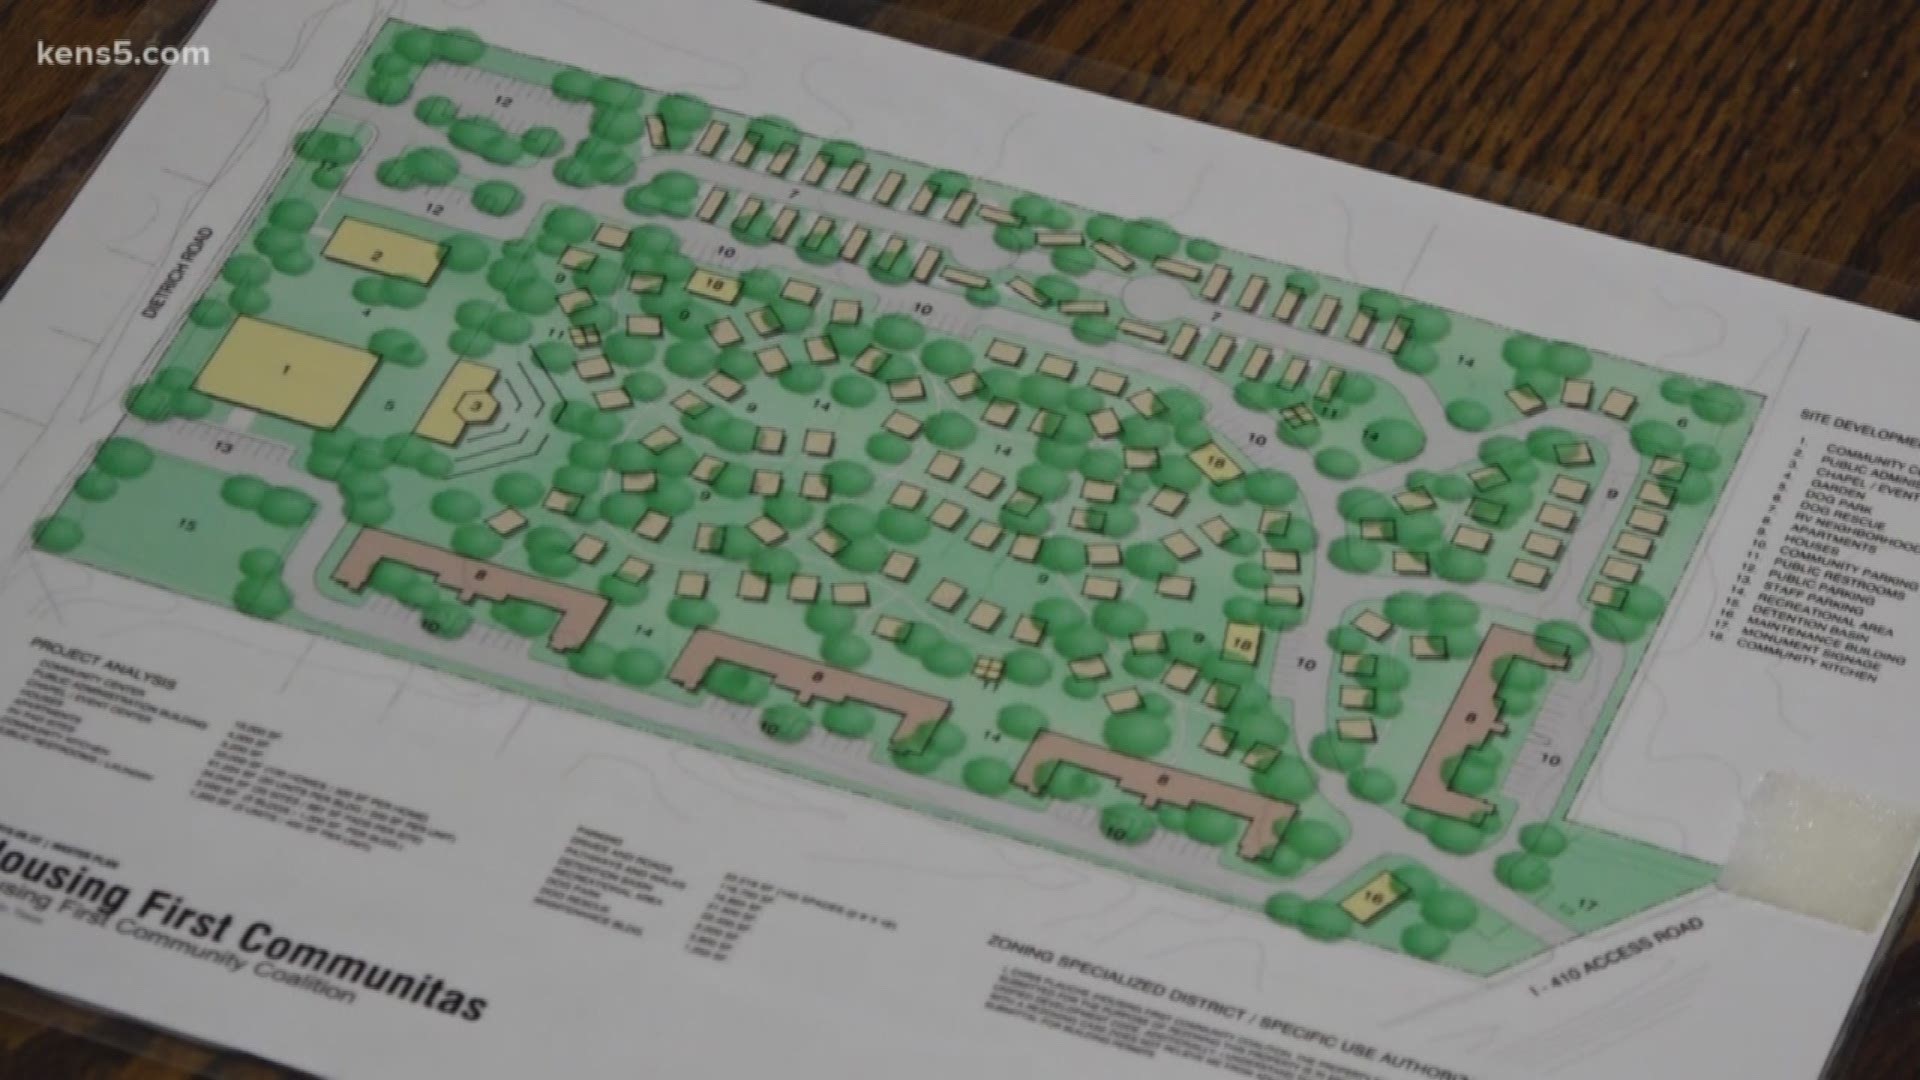 There's no word on when construction will begin, but planners say the project is long-awaited.